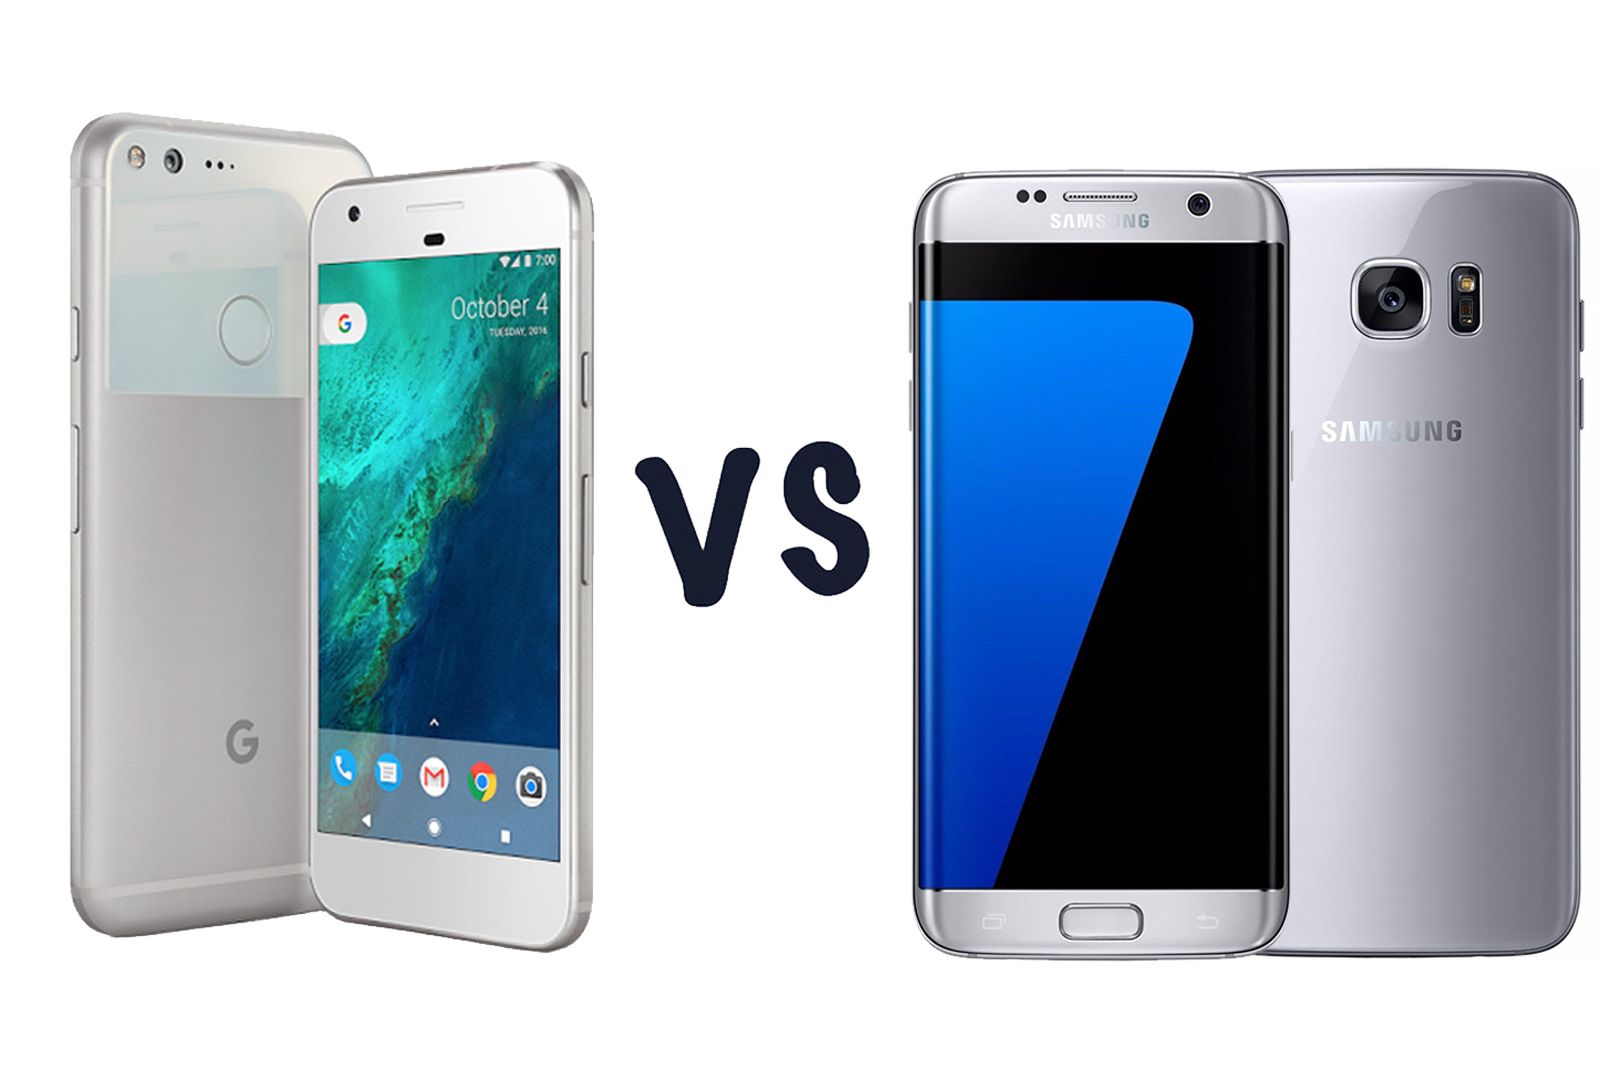 google pixel xl vs samsung galaxy s7 edge which should you choose  image 1